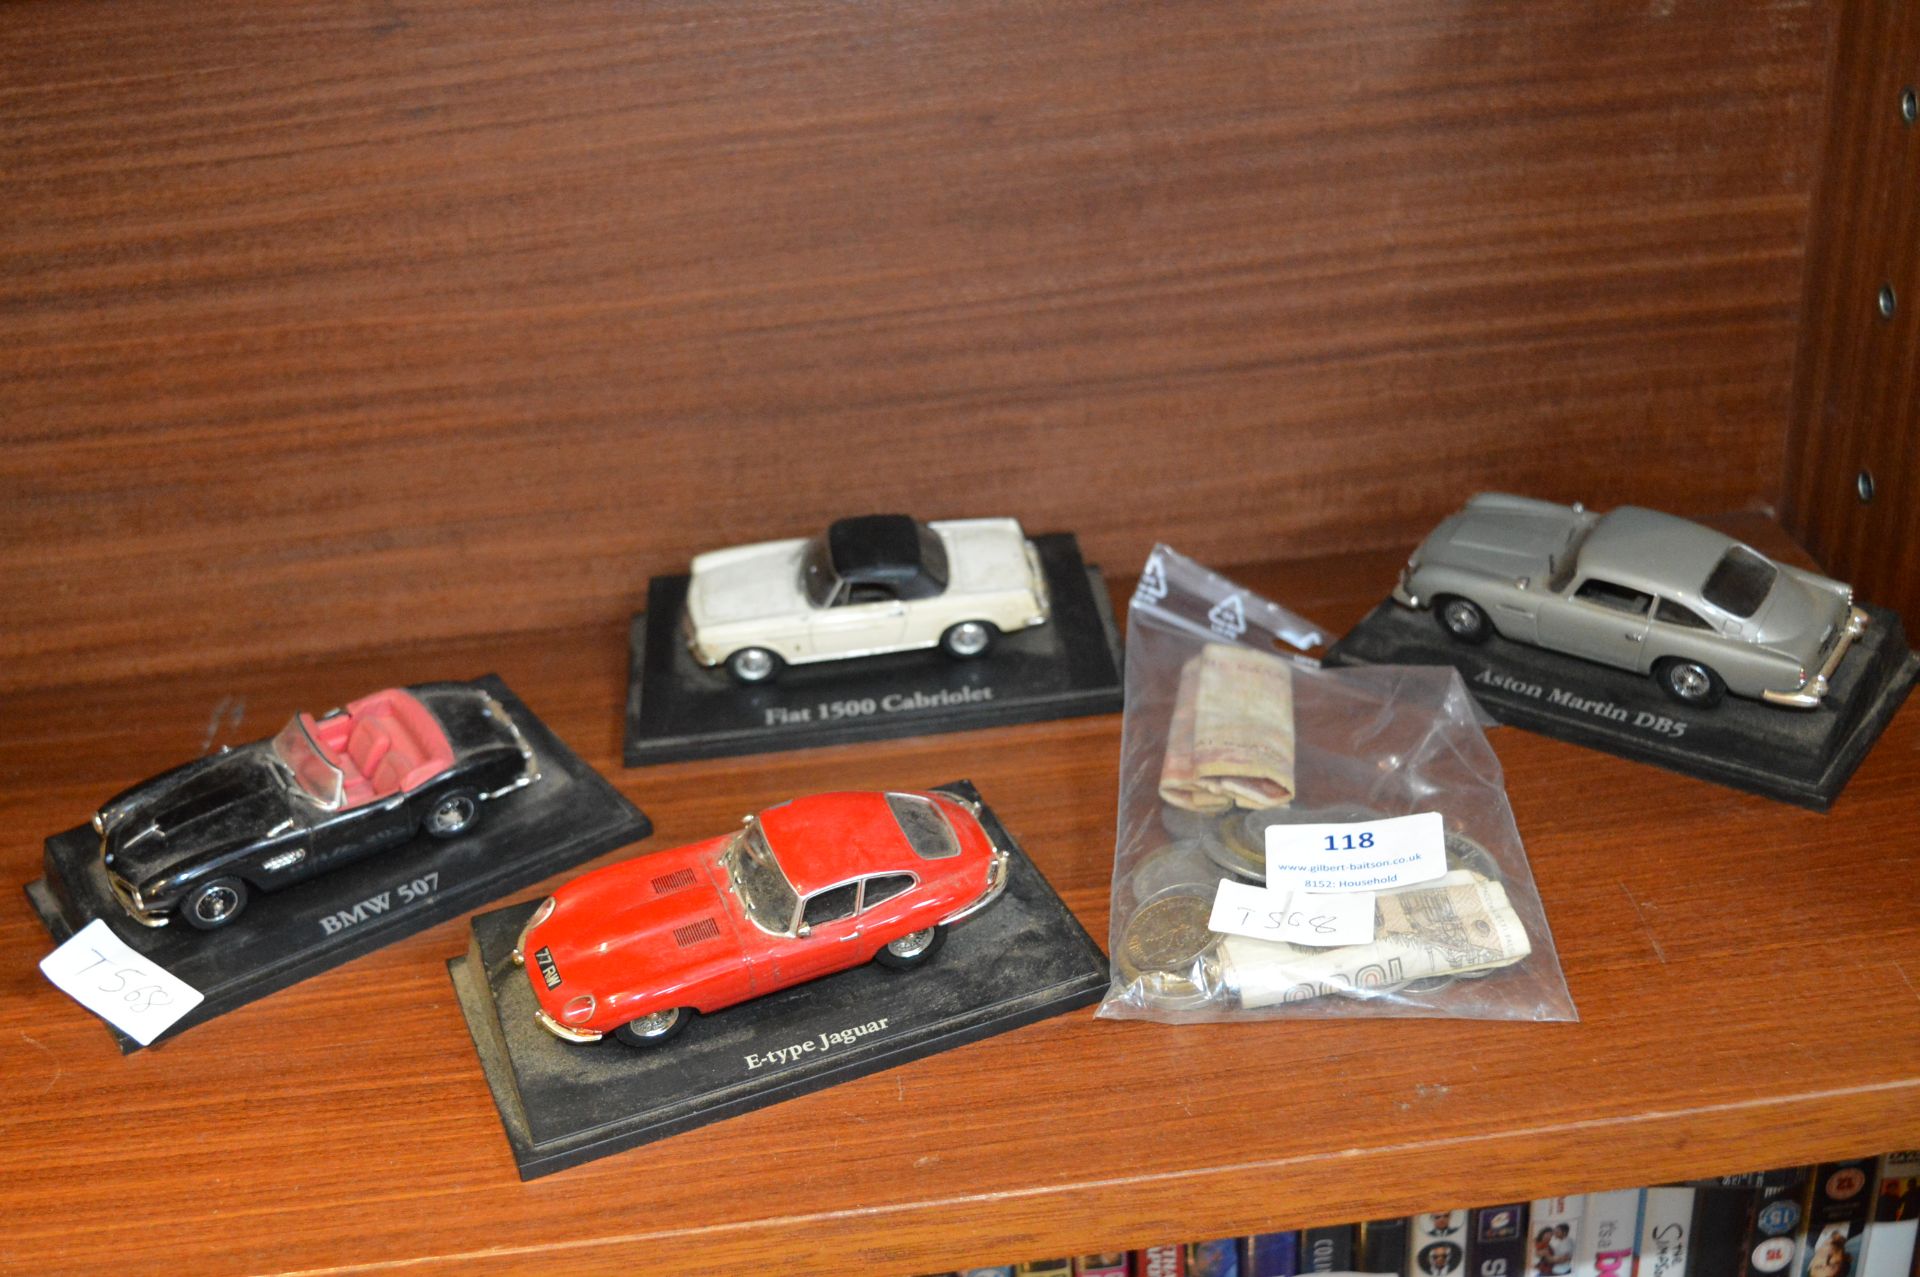 Diecast Vintage Cars plus Banknotes and Coinage